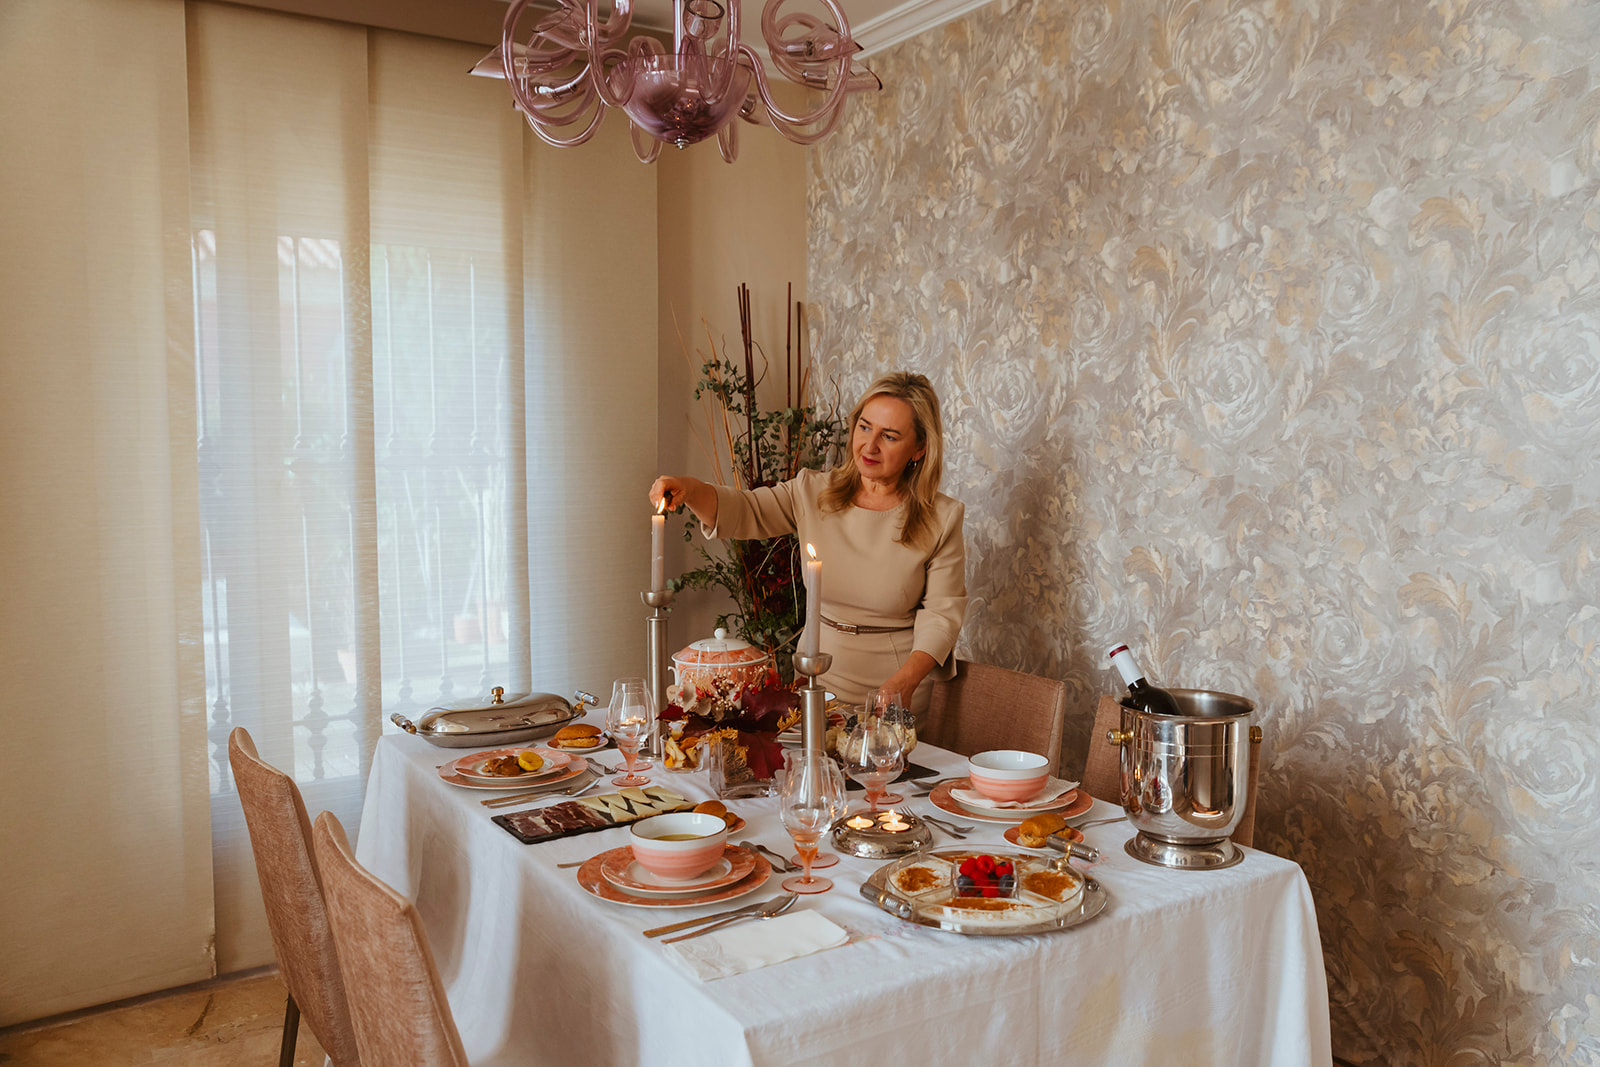 Ana, host of Sazón in Seville, sets the table for her guests in her wonderful home